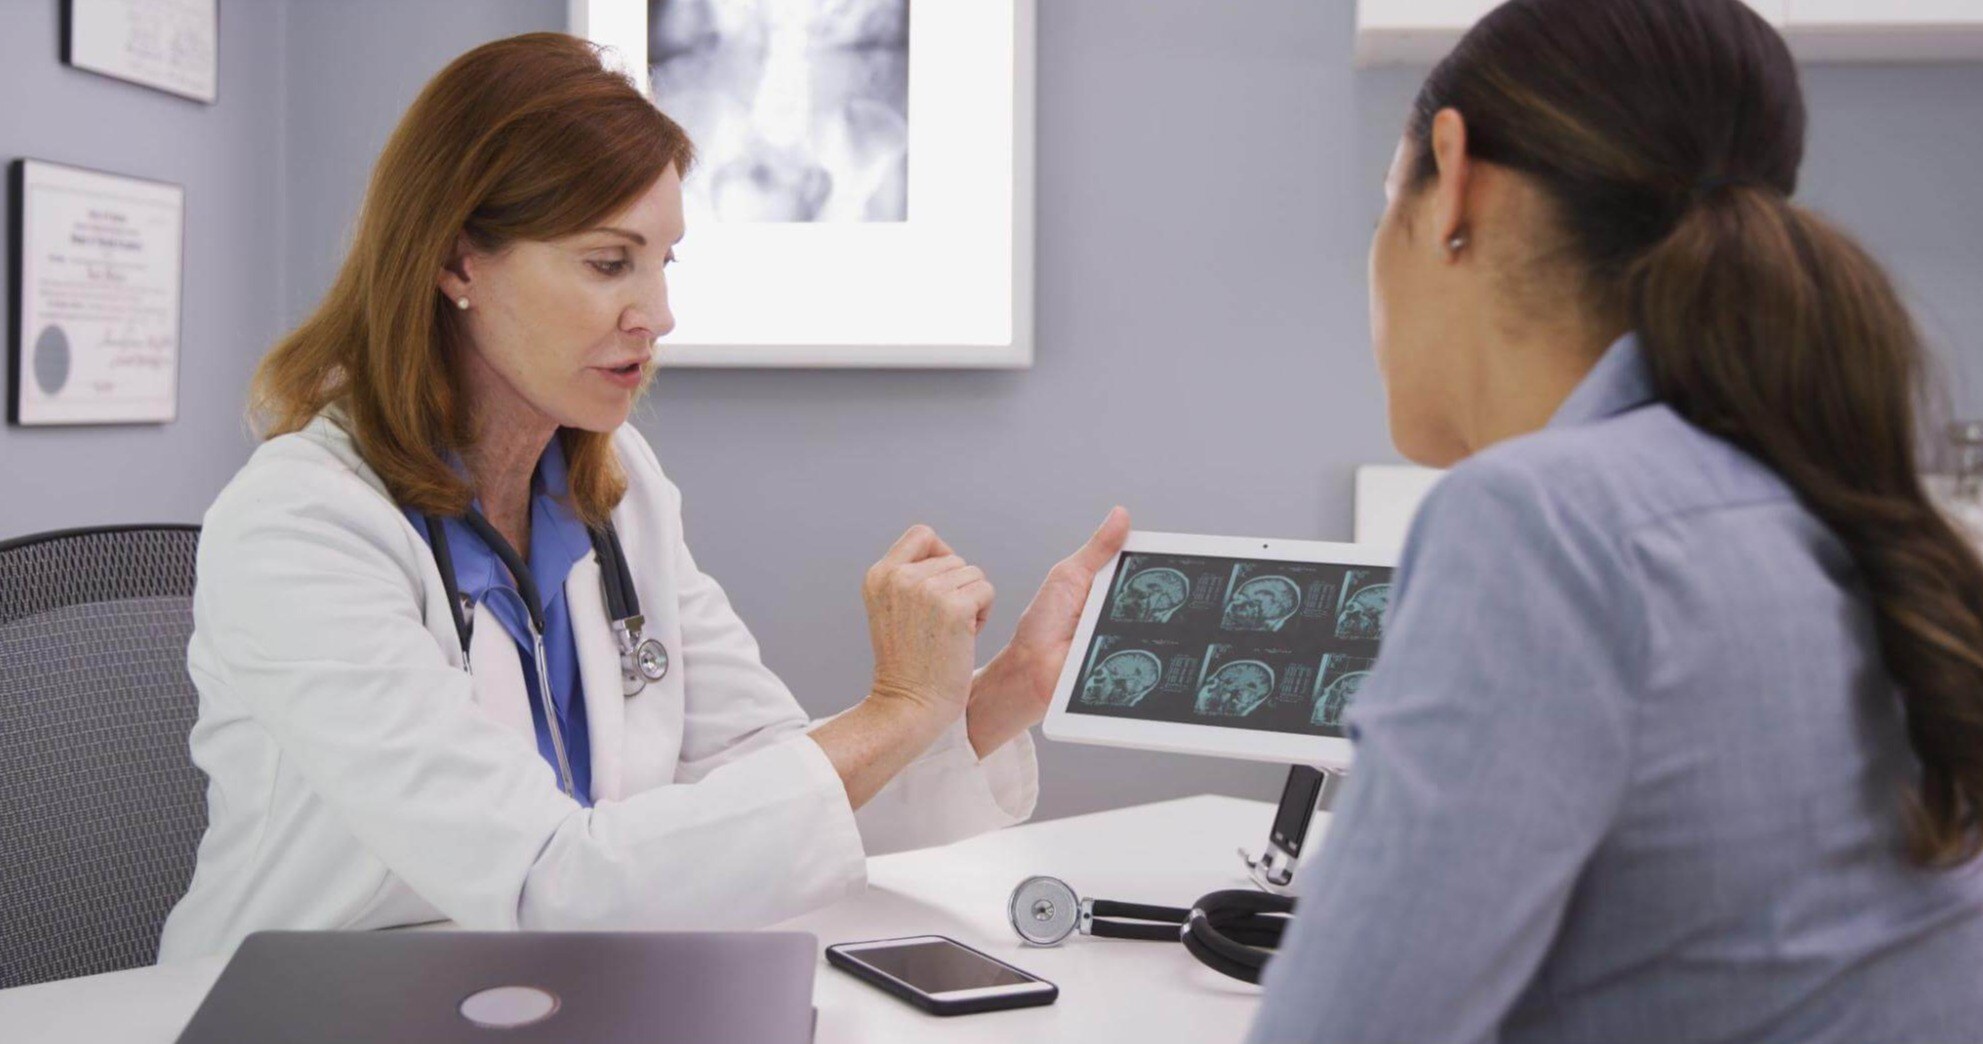 A woman is consulting with her doctor regarding her brain injury